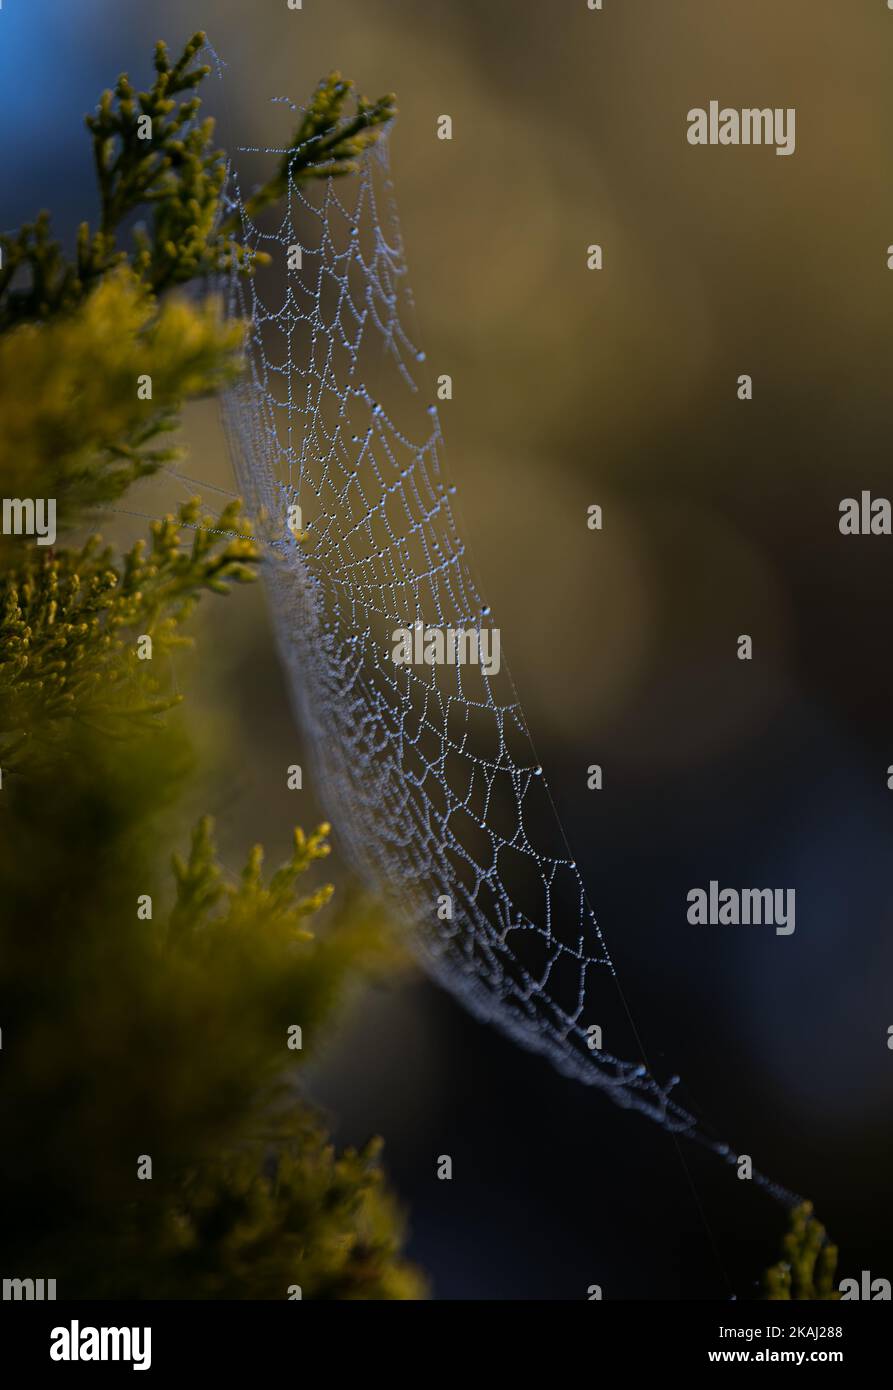 Spiderweb on thuja covered with morning dew. Photographed in a warm, morning light. Stock Photo